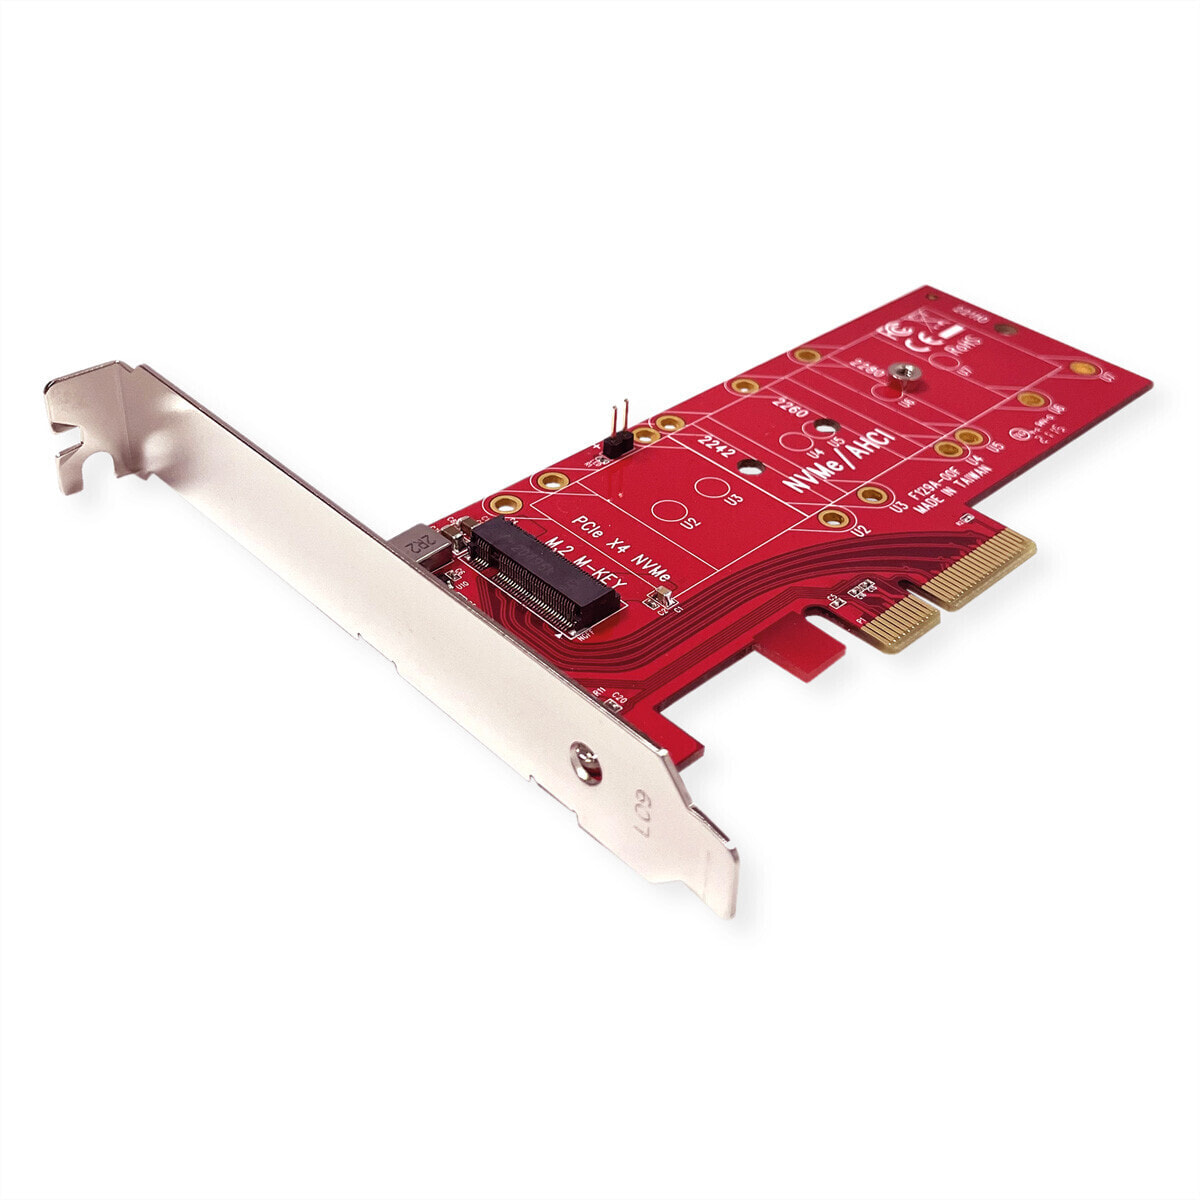 Adapter PCIe4.0 x4 fuer PCIe-NVMe M.2 110mm SSD